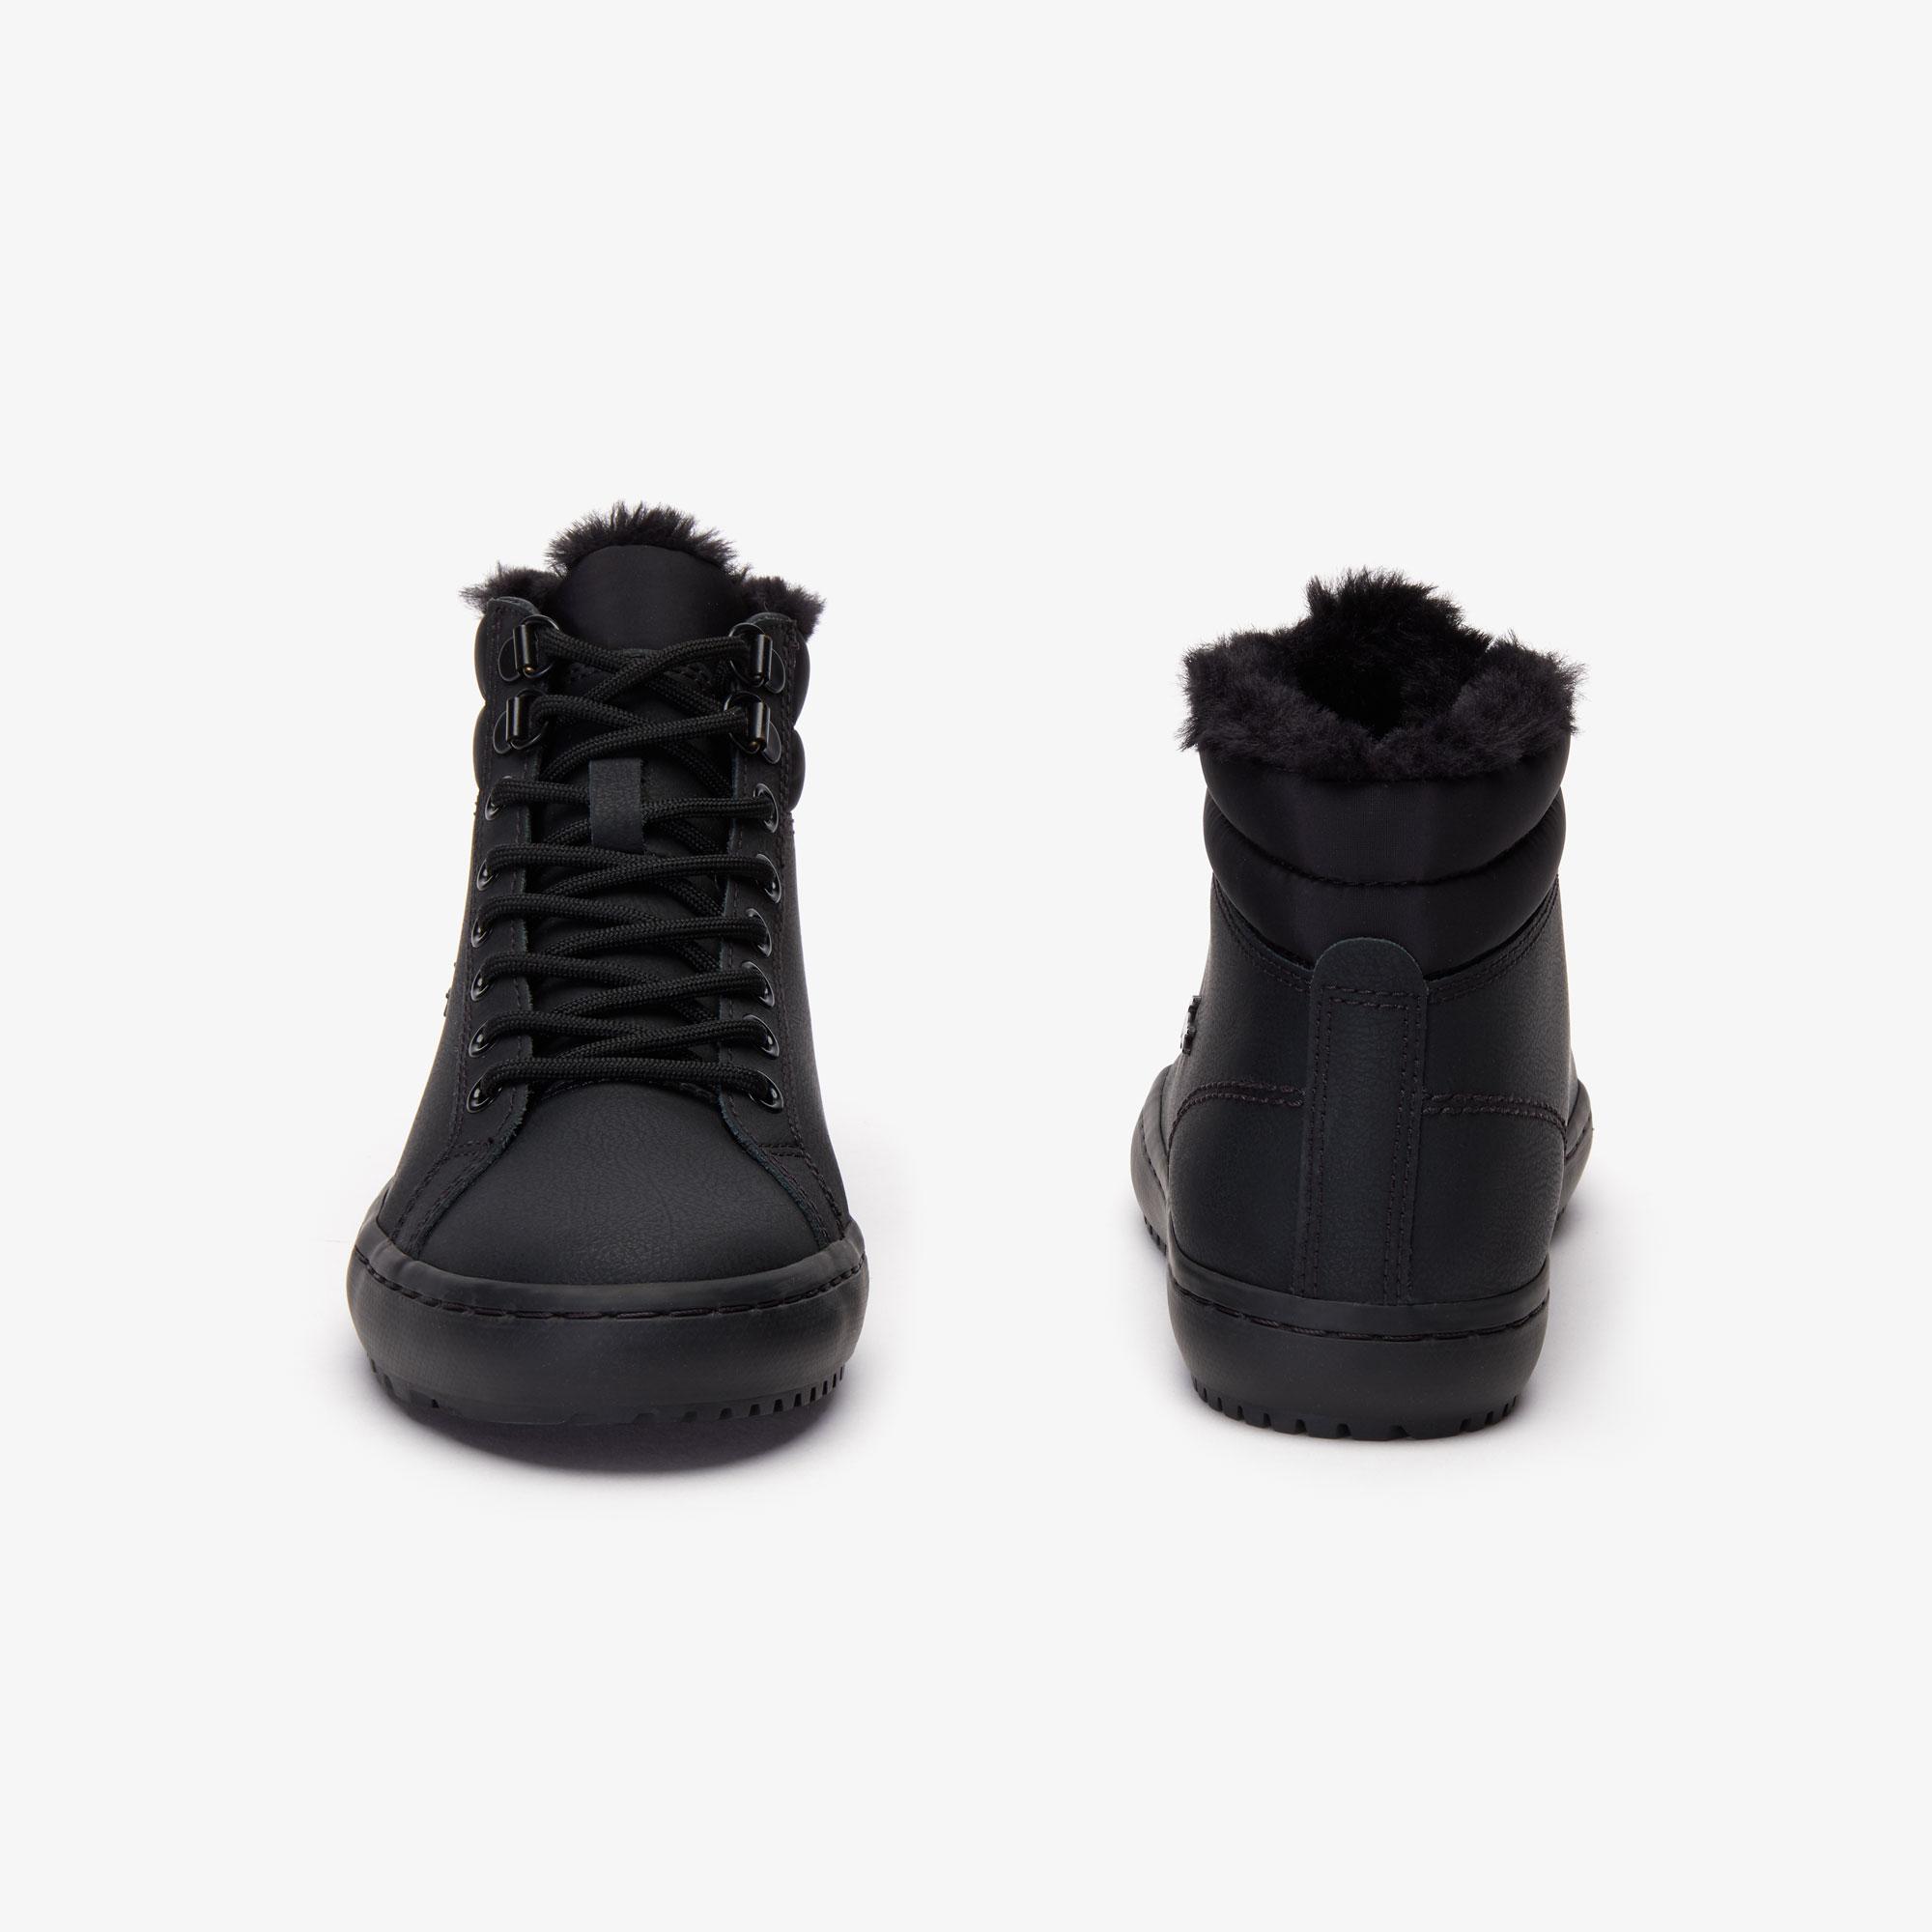 Lacoste Straightset Thermo 4191 Boots